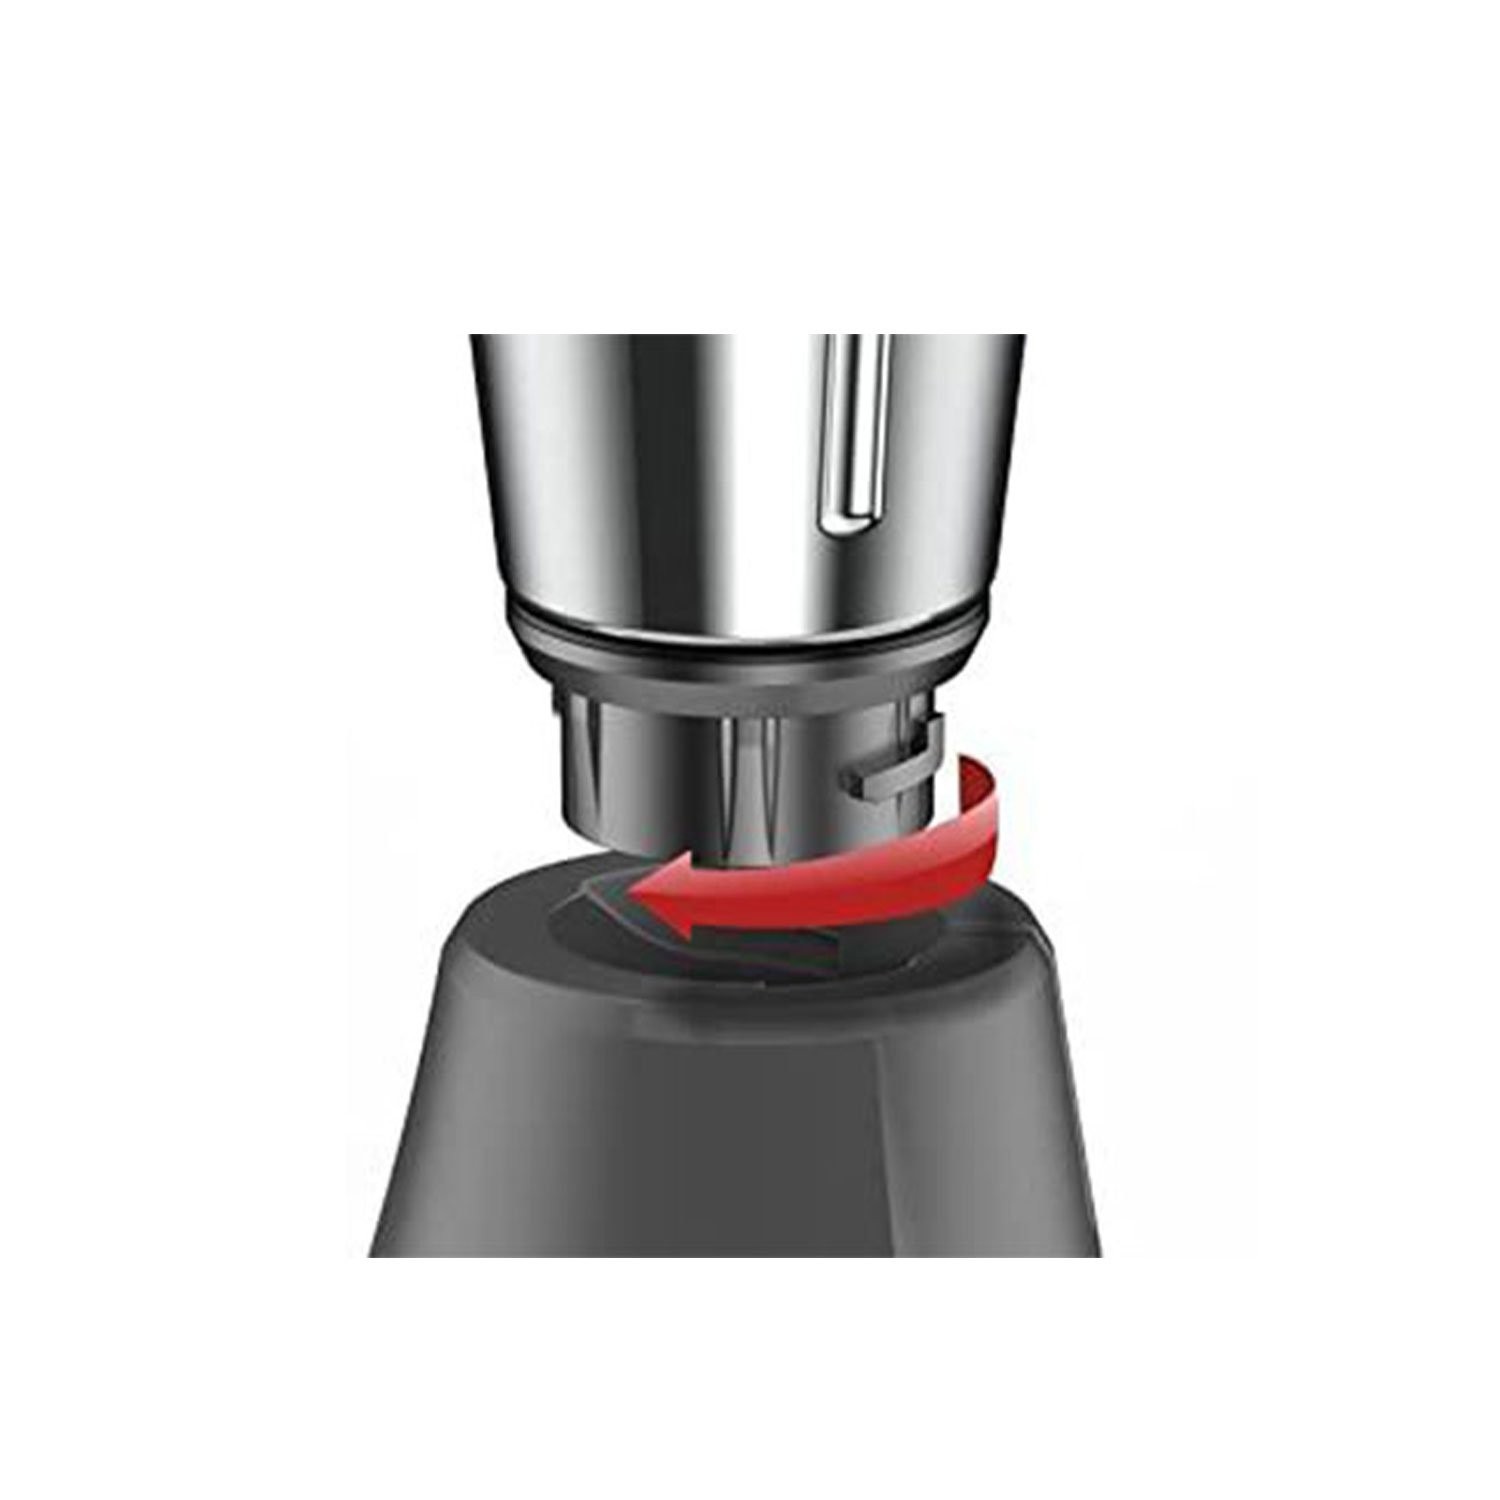 vidiem-eva-citron-550w-stainless-steel-jars-indian-mixer-grinder-spice-coffee-grinder-110v-for-use-in-canada-usa